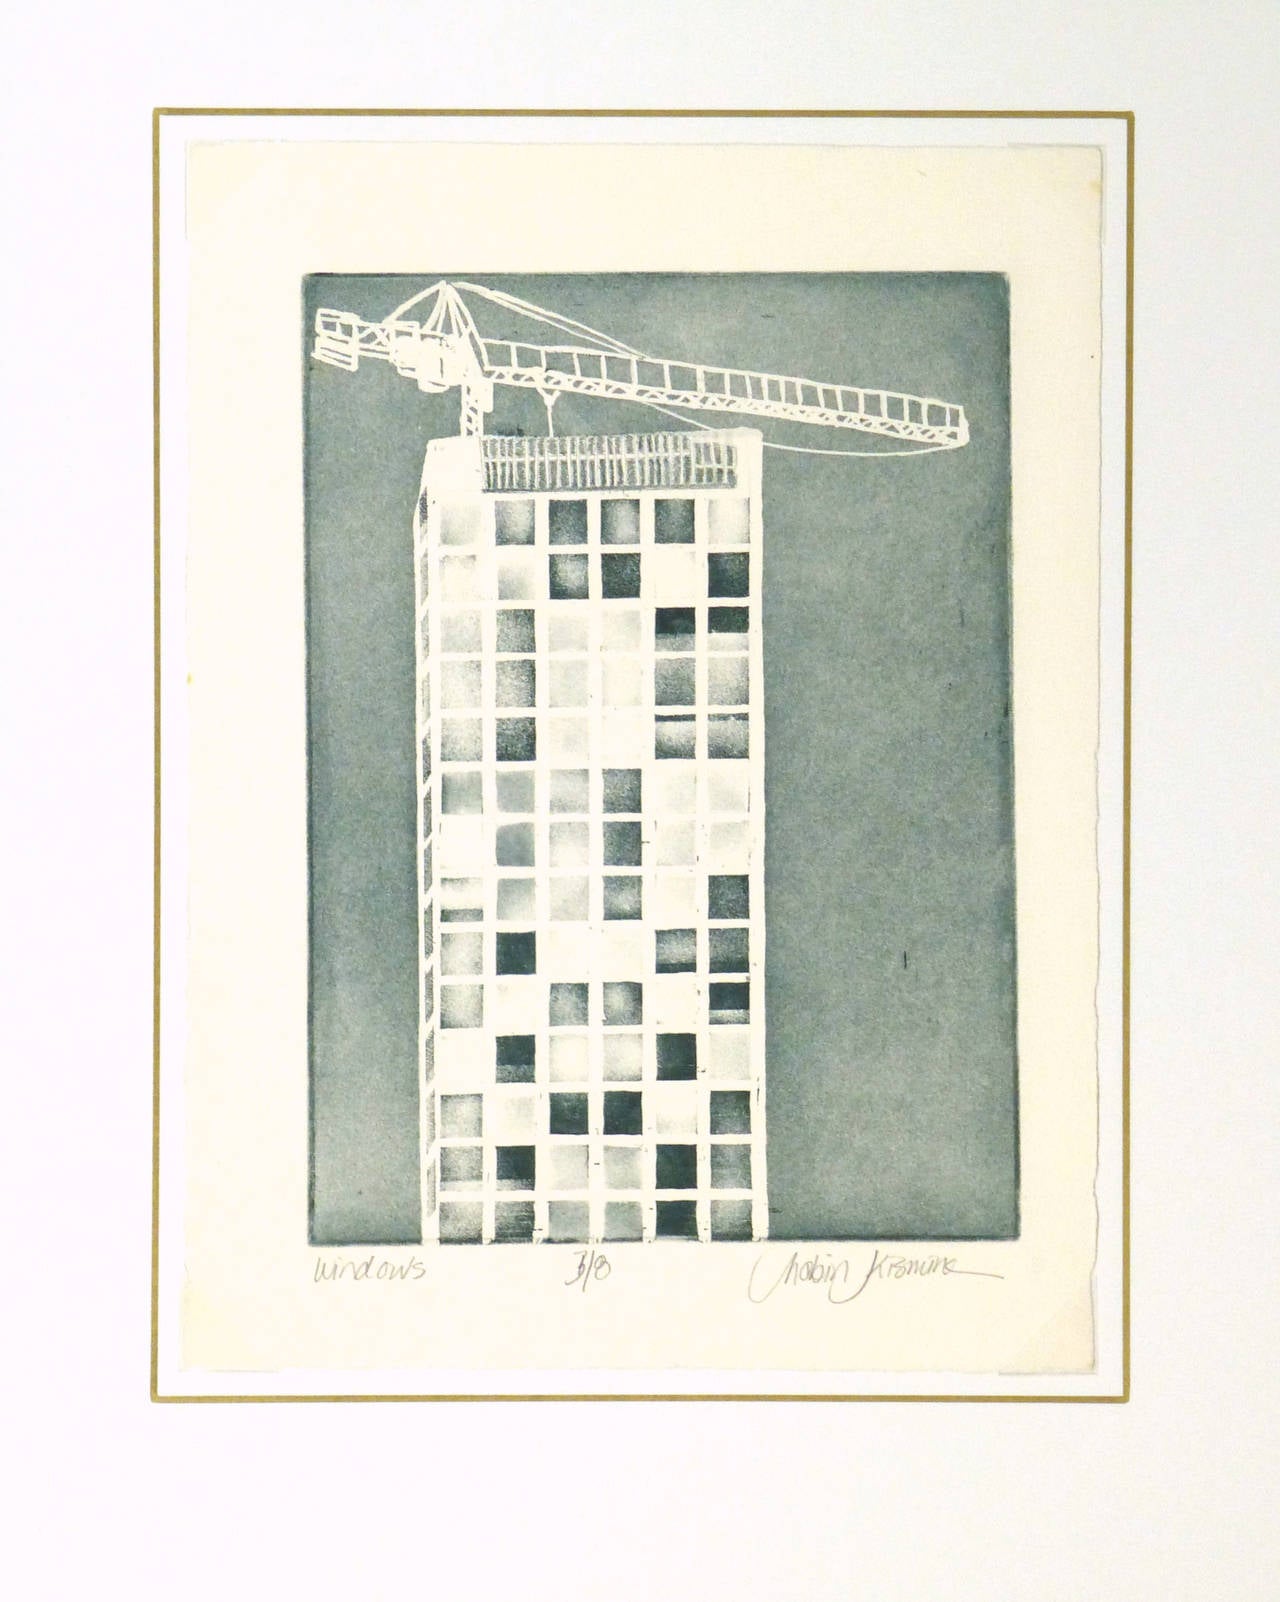 Impactful aquatint etching of a high rise building covered in small windows with a tower crane perched atop by American artist Kismine Varner, circa 1990. Titled 